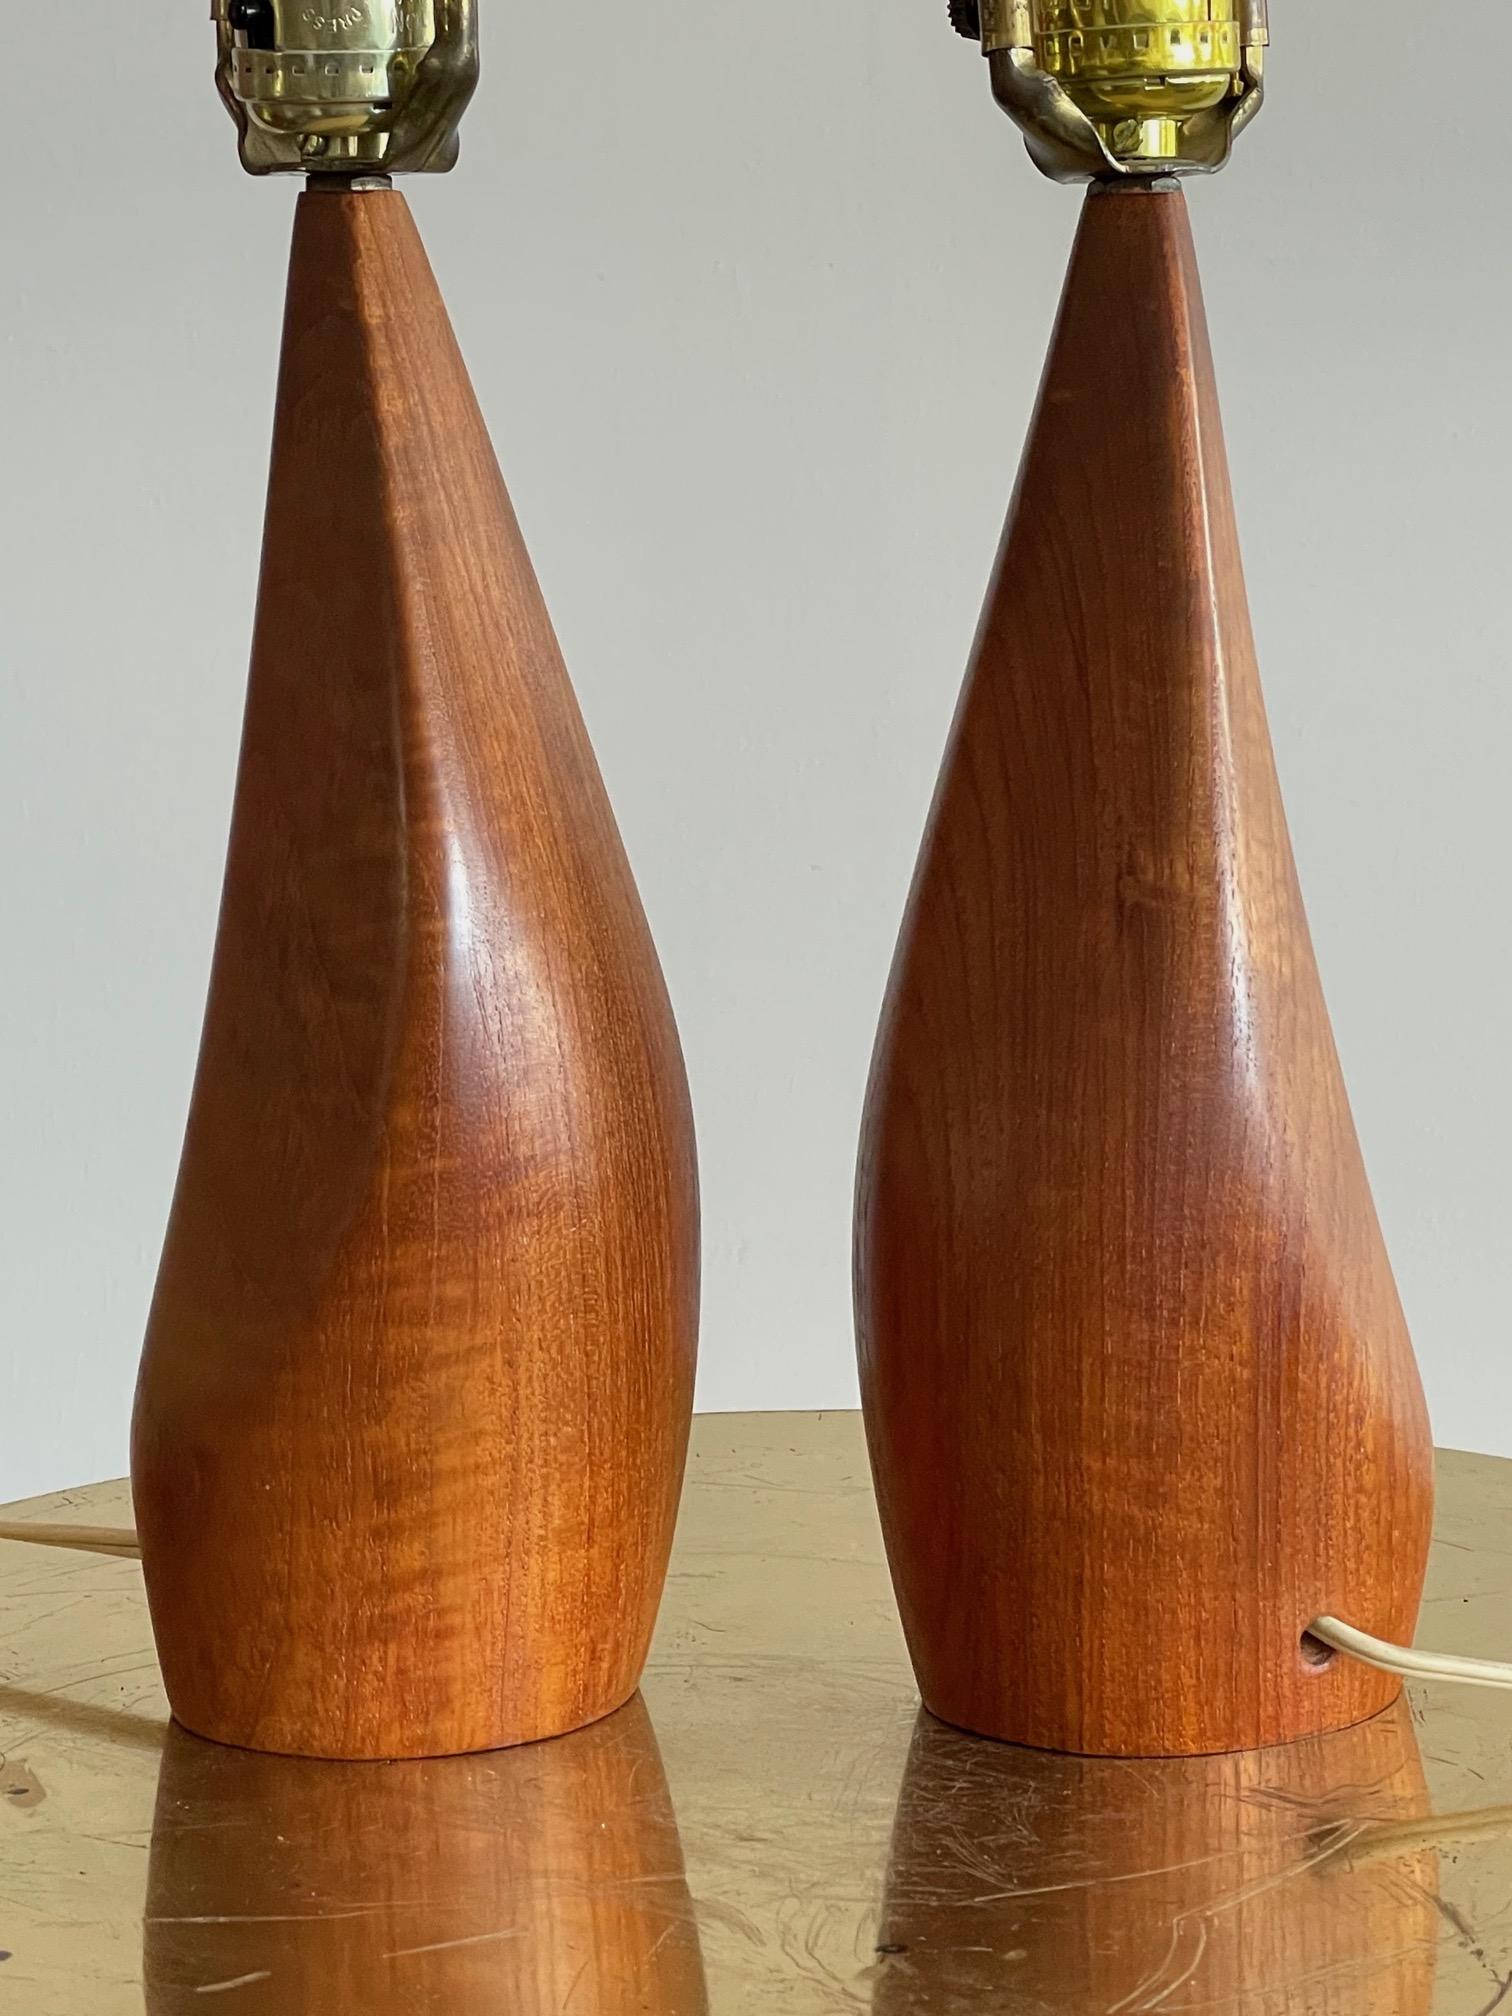 A pair of unusual Danish teak lamps by Ernst Henriksen, signed, circa 1960s. In very good condition with beautiful graining.
 